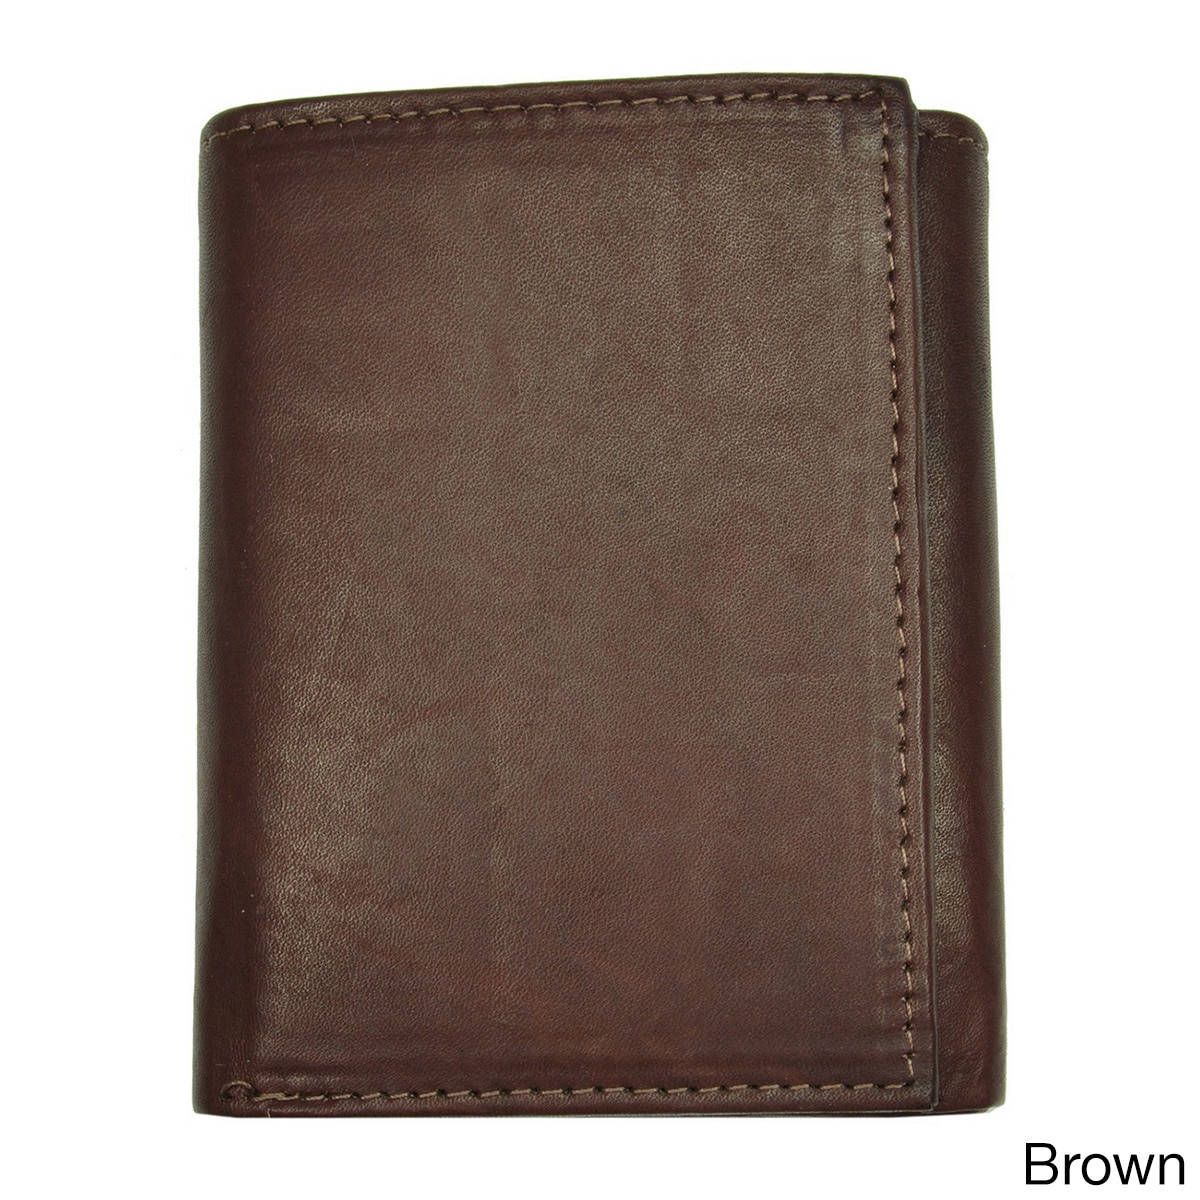 Mens Leather Tri fold Wallet   Brown Or Tan